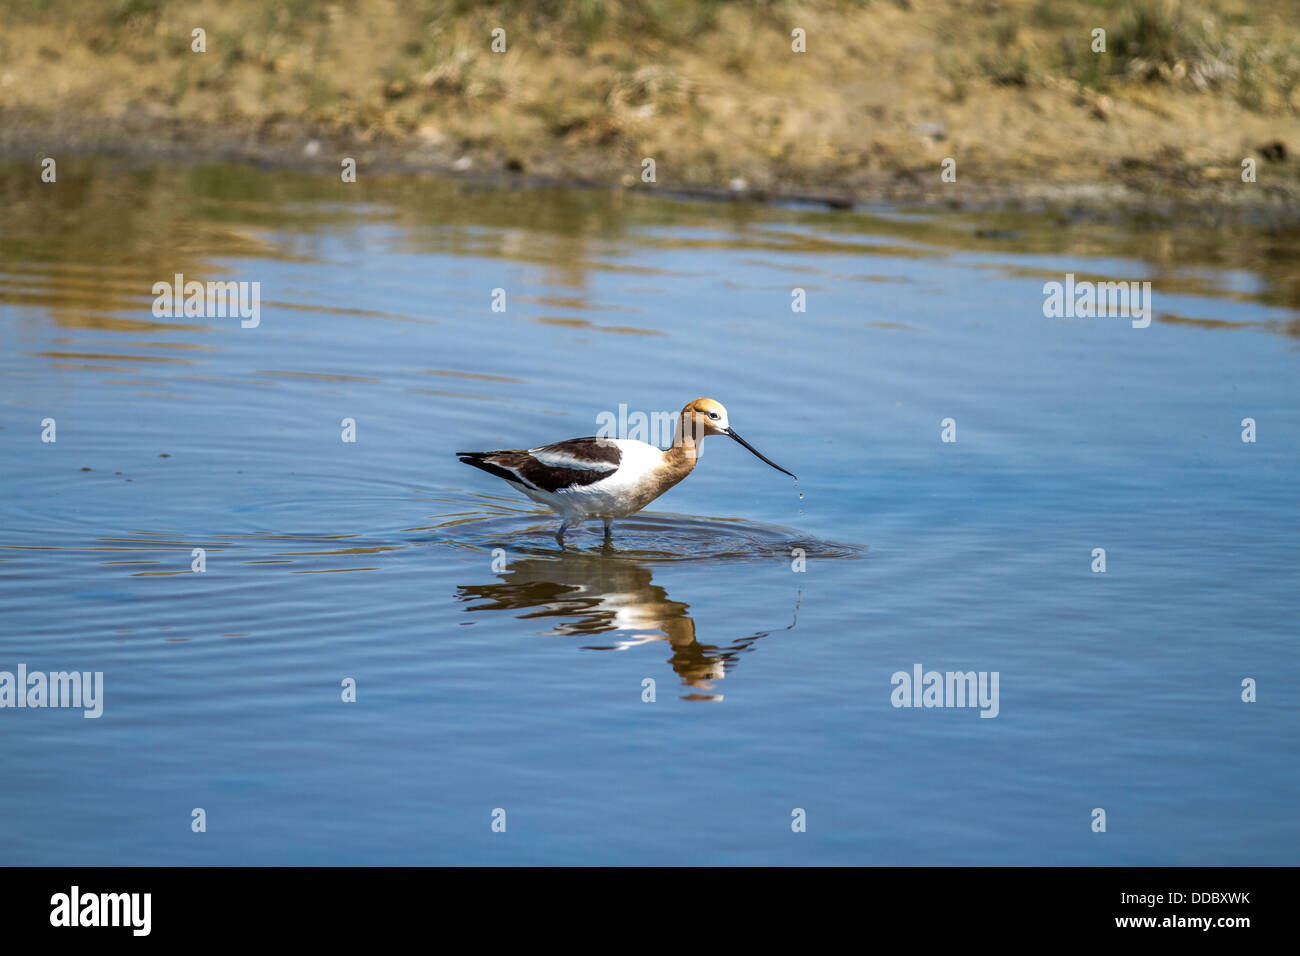 American Avocet (Recurvirostra americana) Beautiful colorful bird, dipping long bill in blue water, with mirrored reflection. Stock Photo